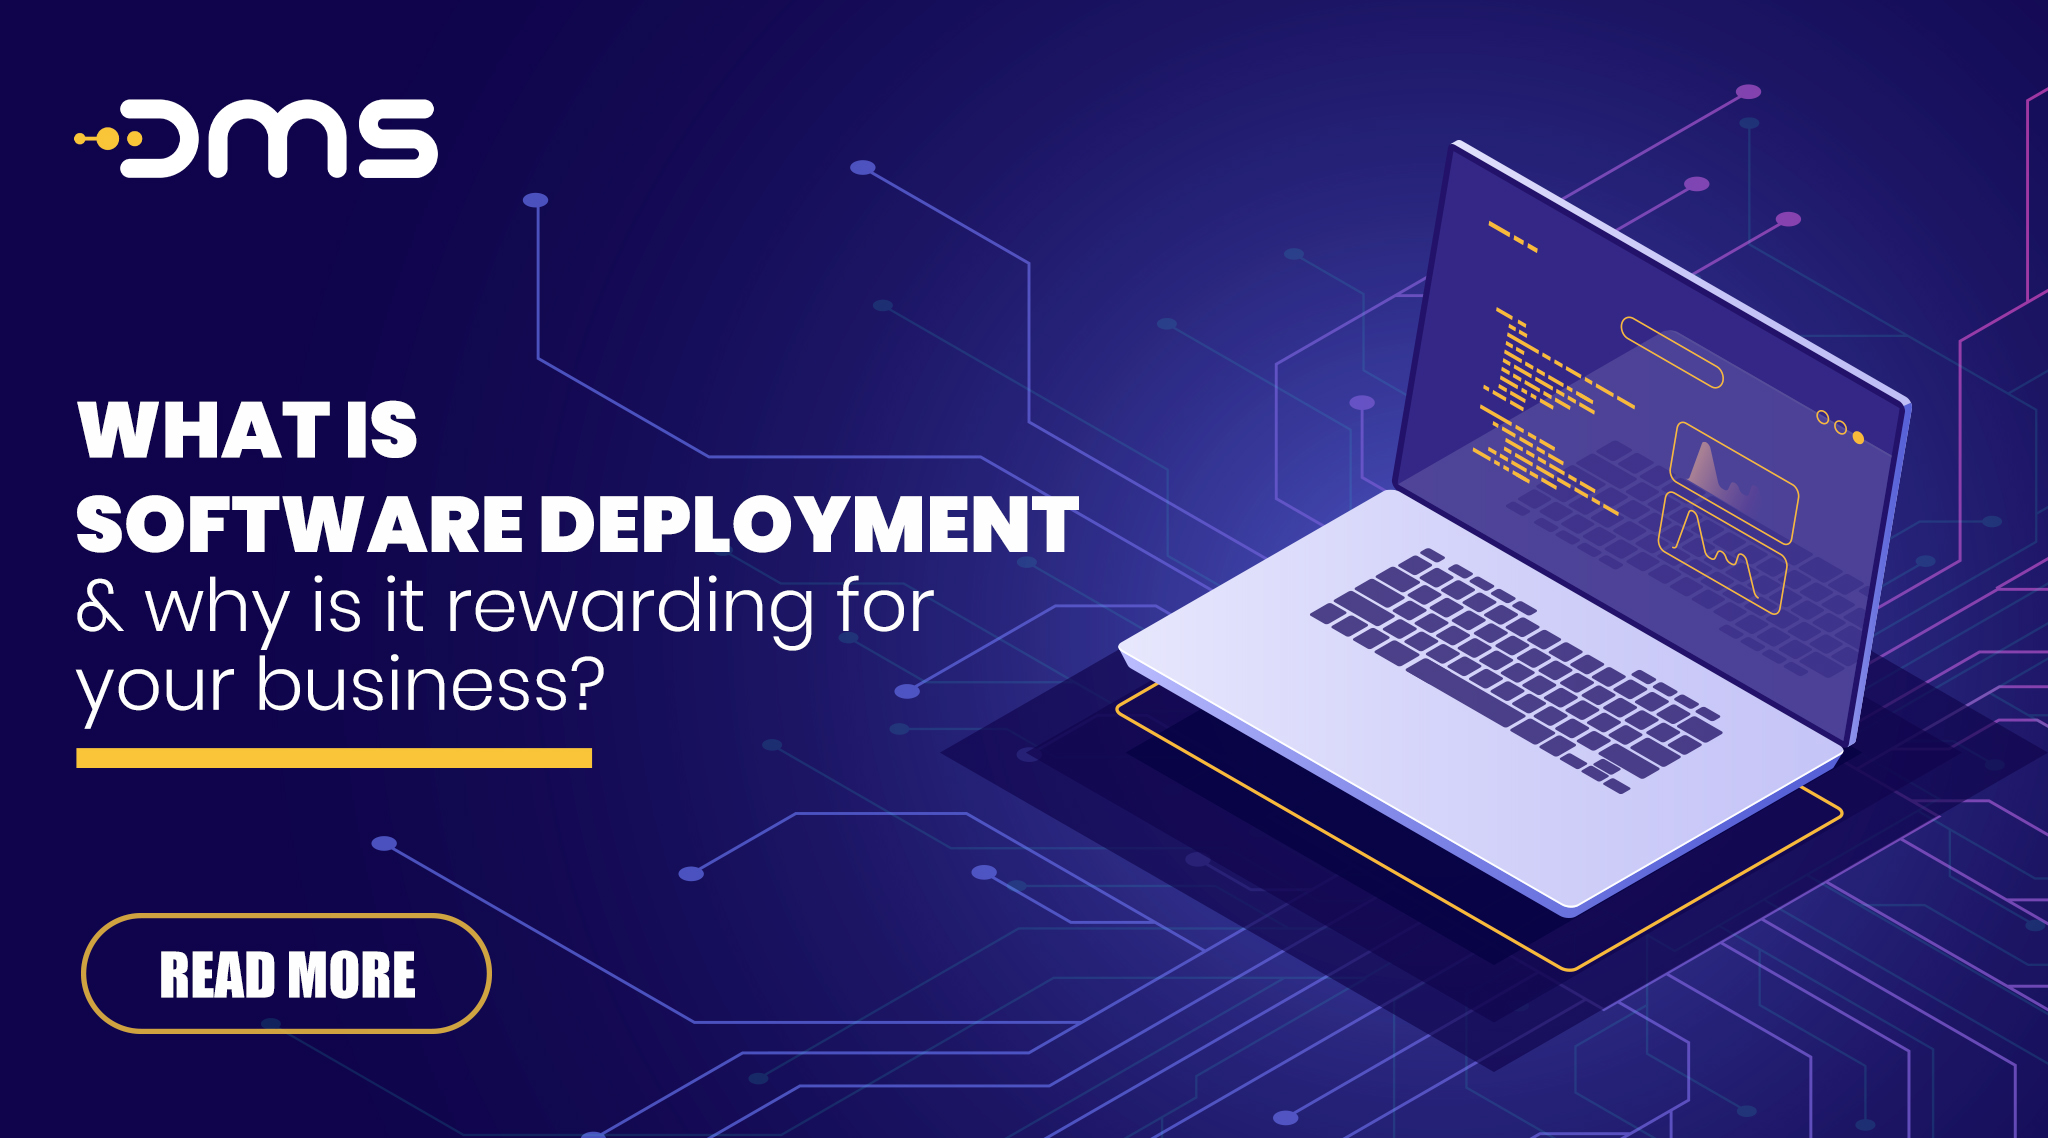 What is Software Deployment and why is it rewarding for your business?